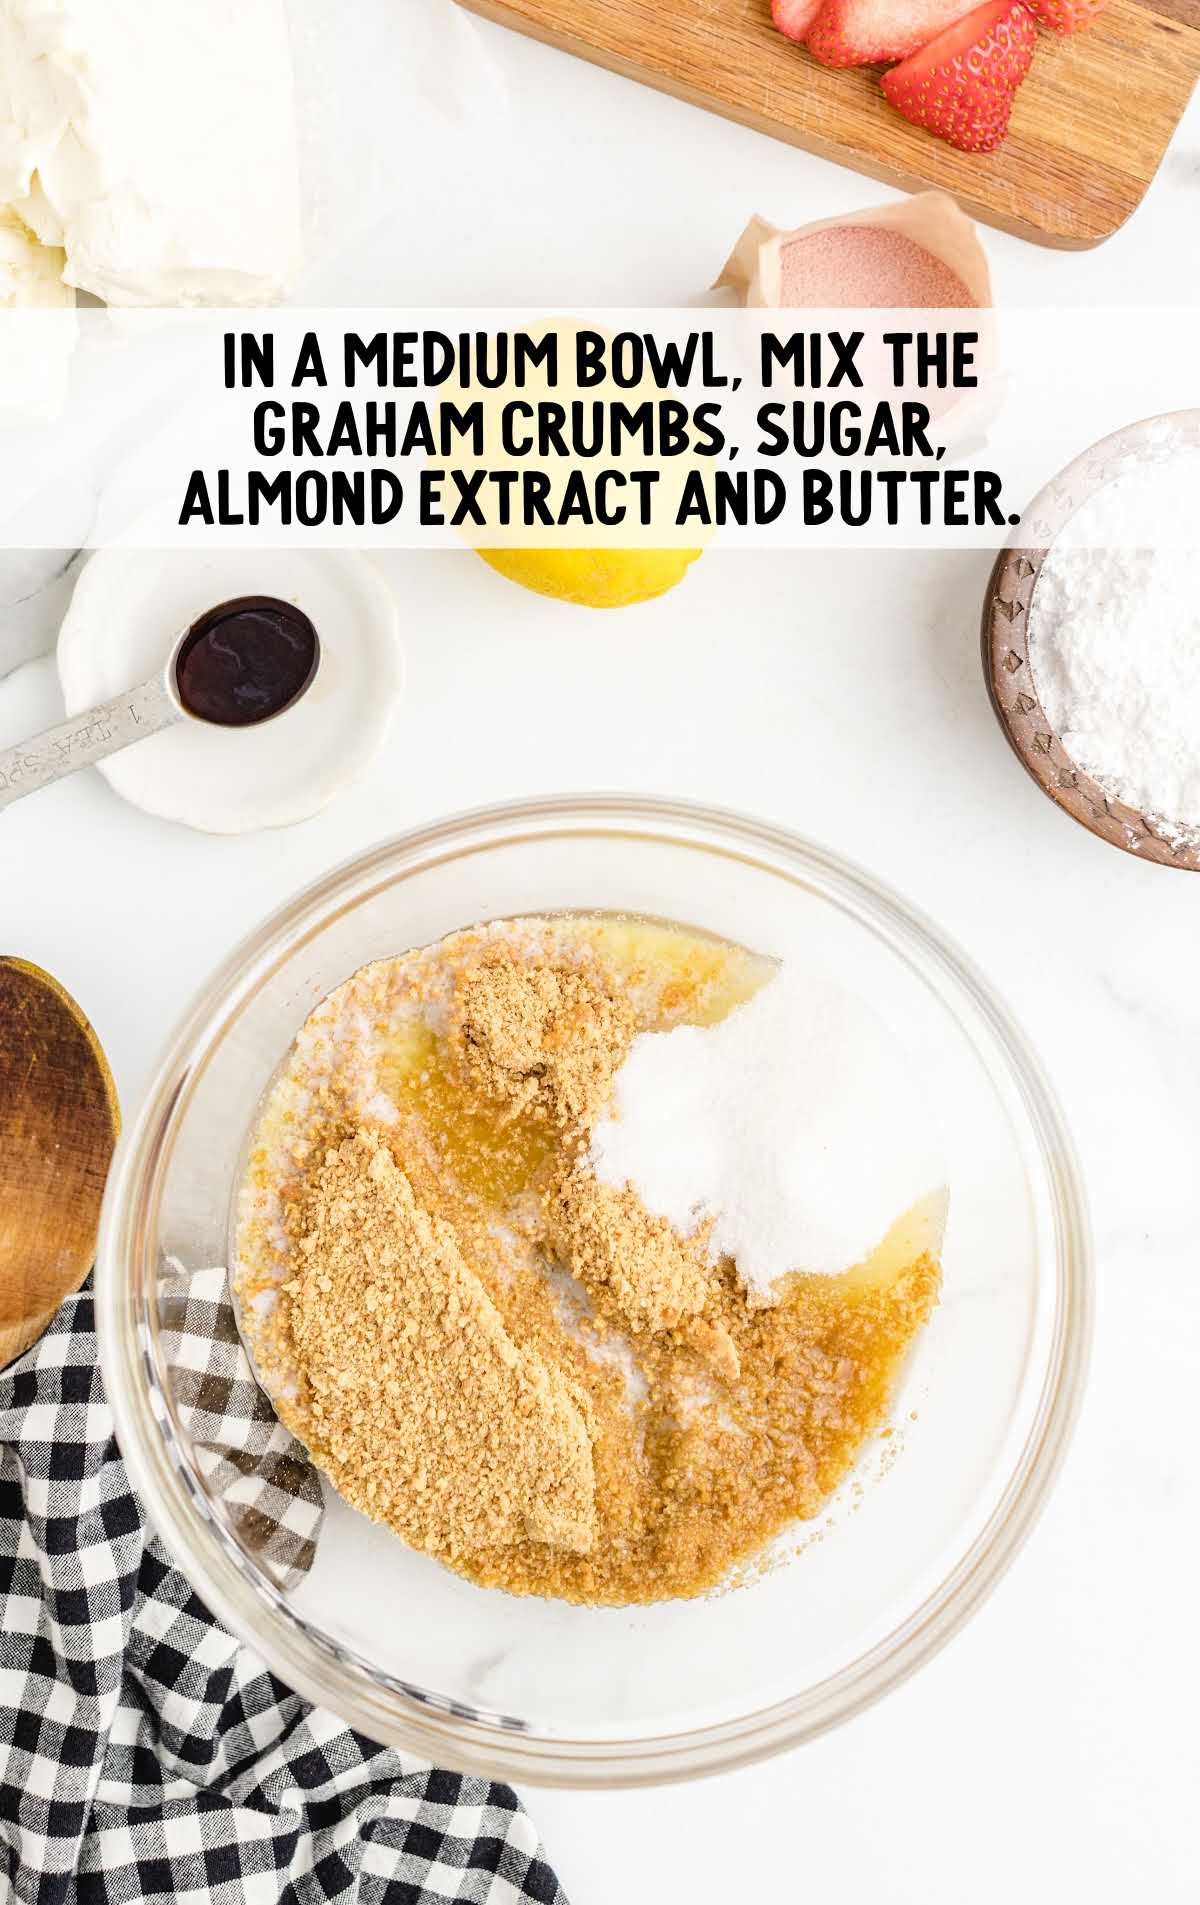 graham crumbs, sugar, almond extract and butter mixed in a bowl